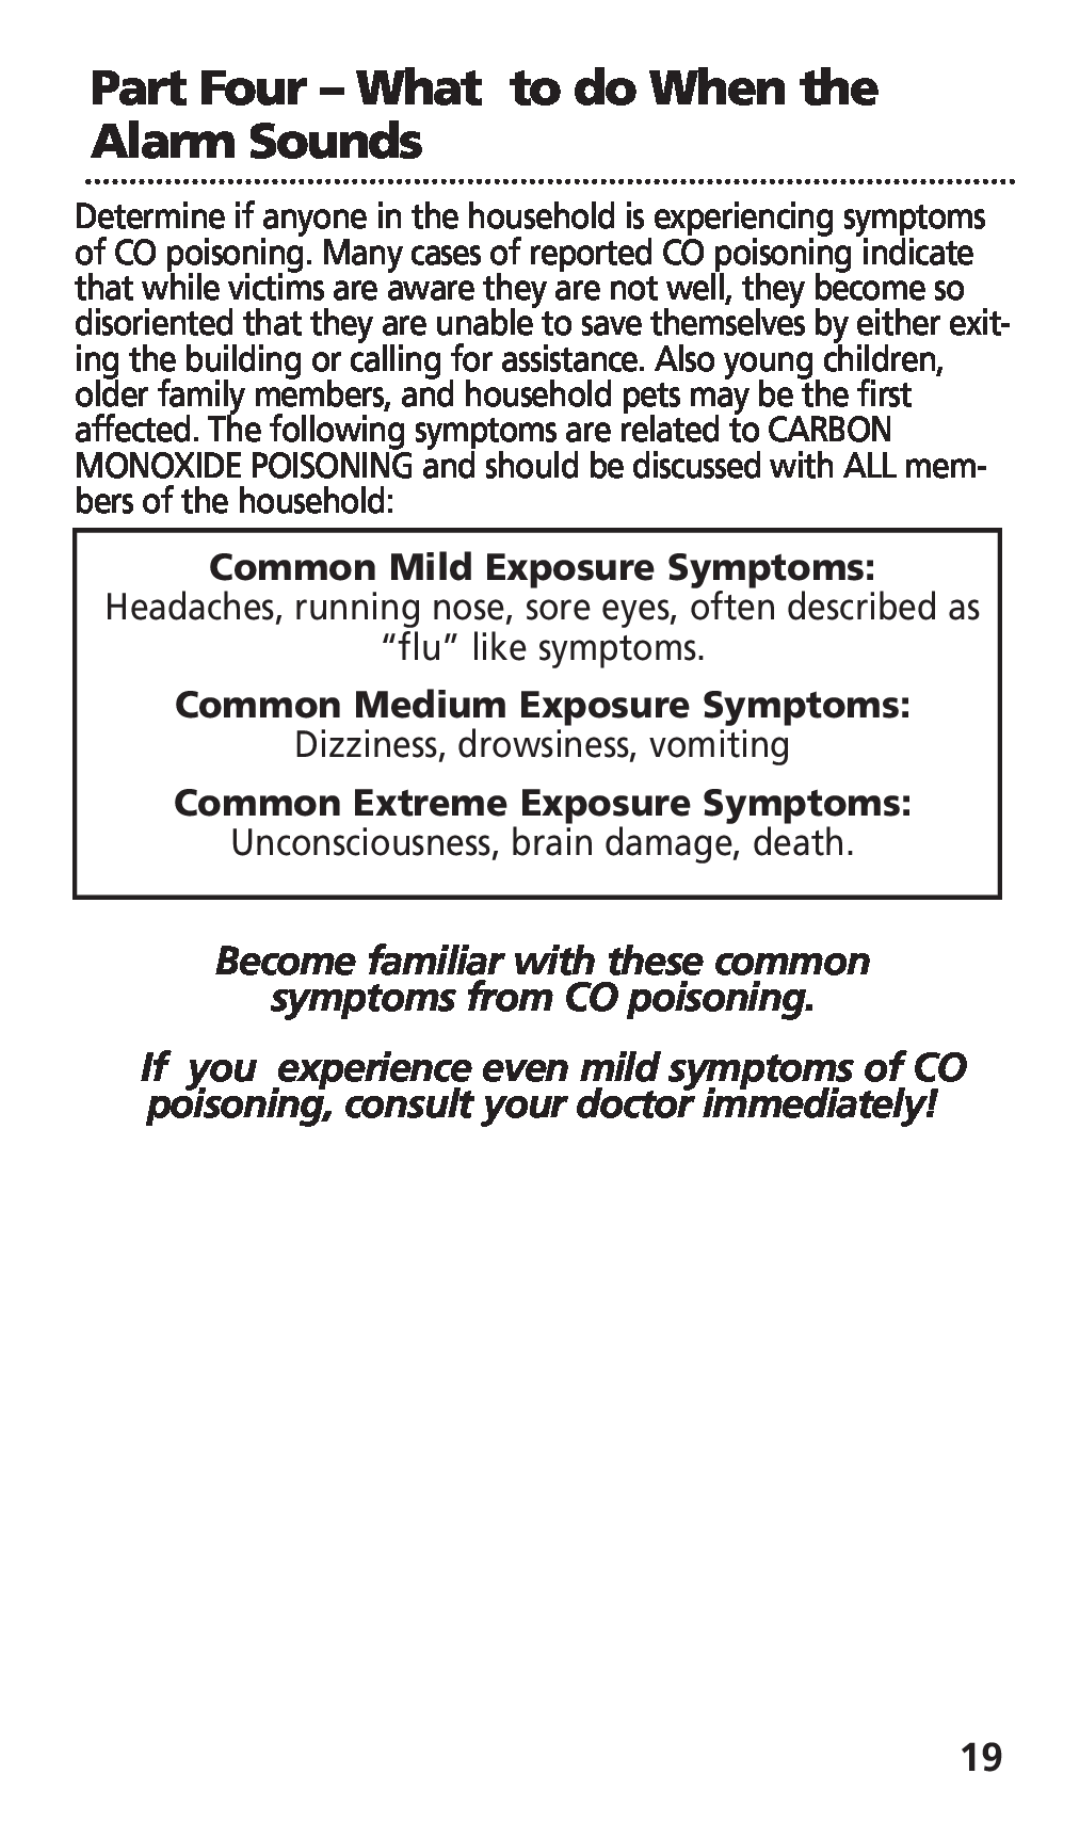 Kidde KN-COB-LCB-A Part Four - What to do When the Alarm Sounds, Common Mild Exposure Symptoms, symptoms from CO poisoning 